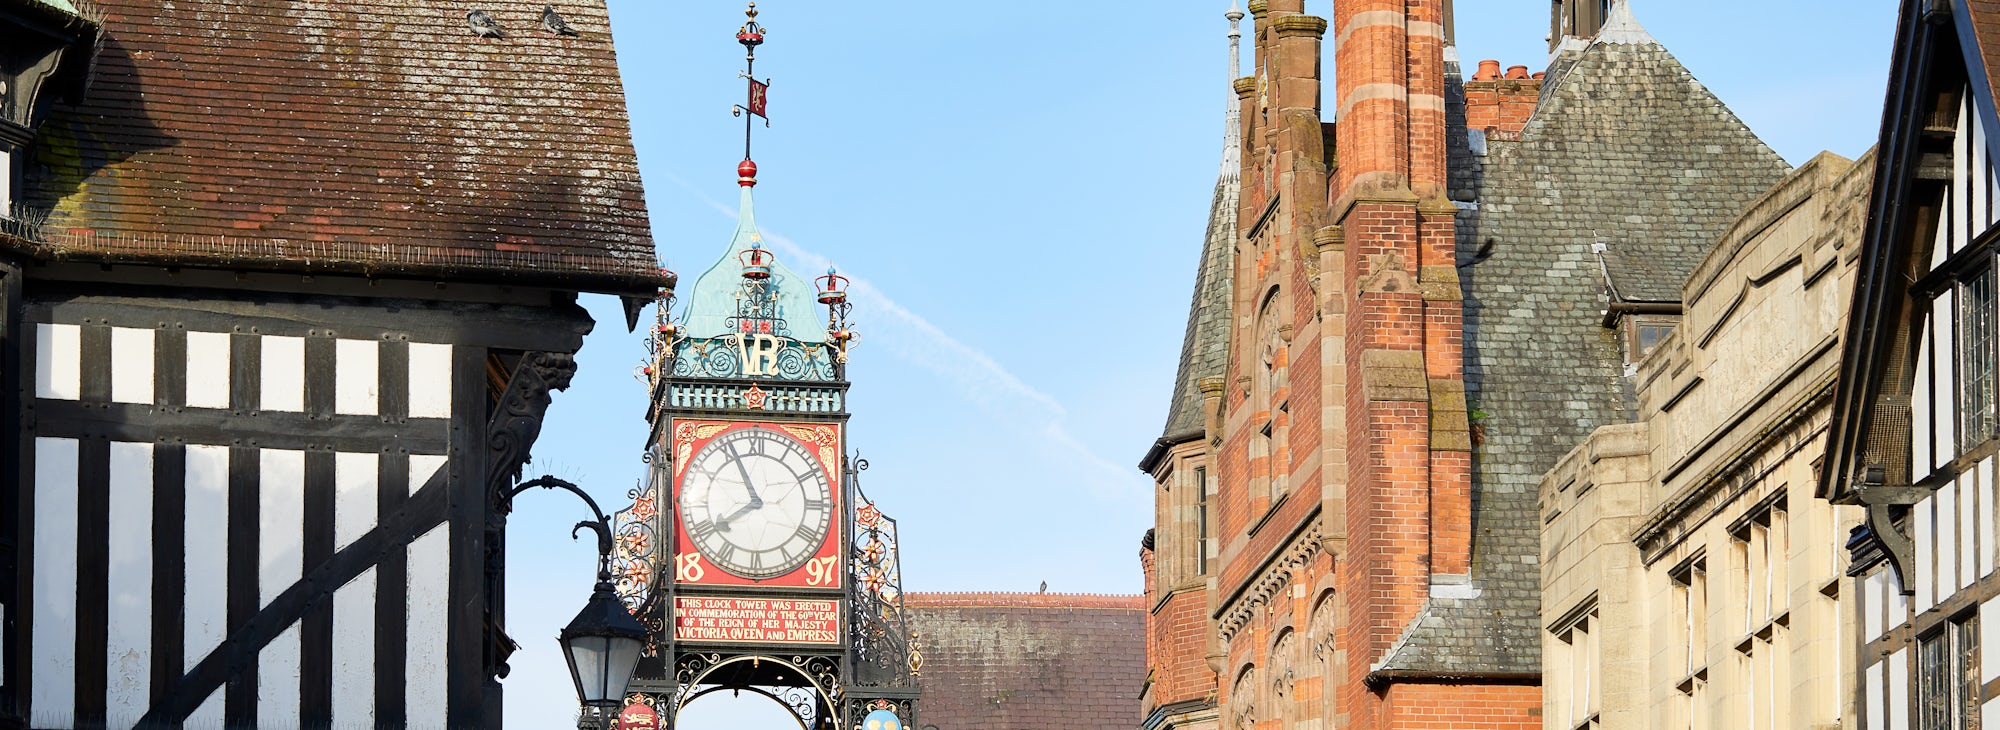 Chester Town Clock at New Blossoms, Chester